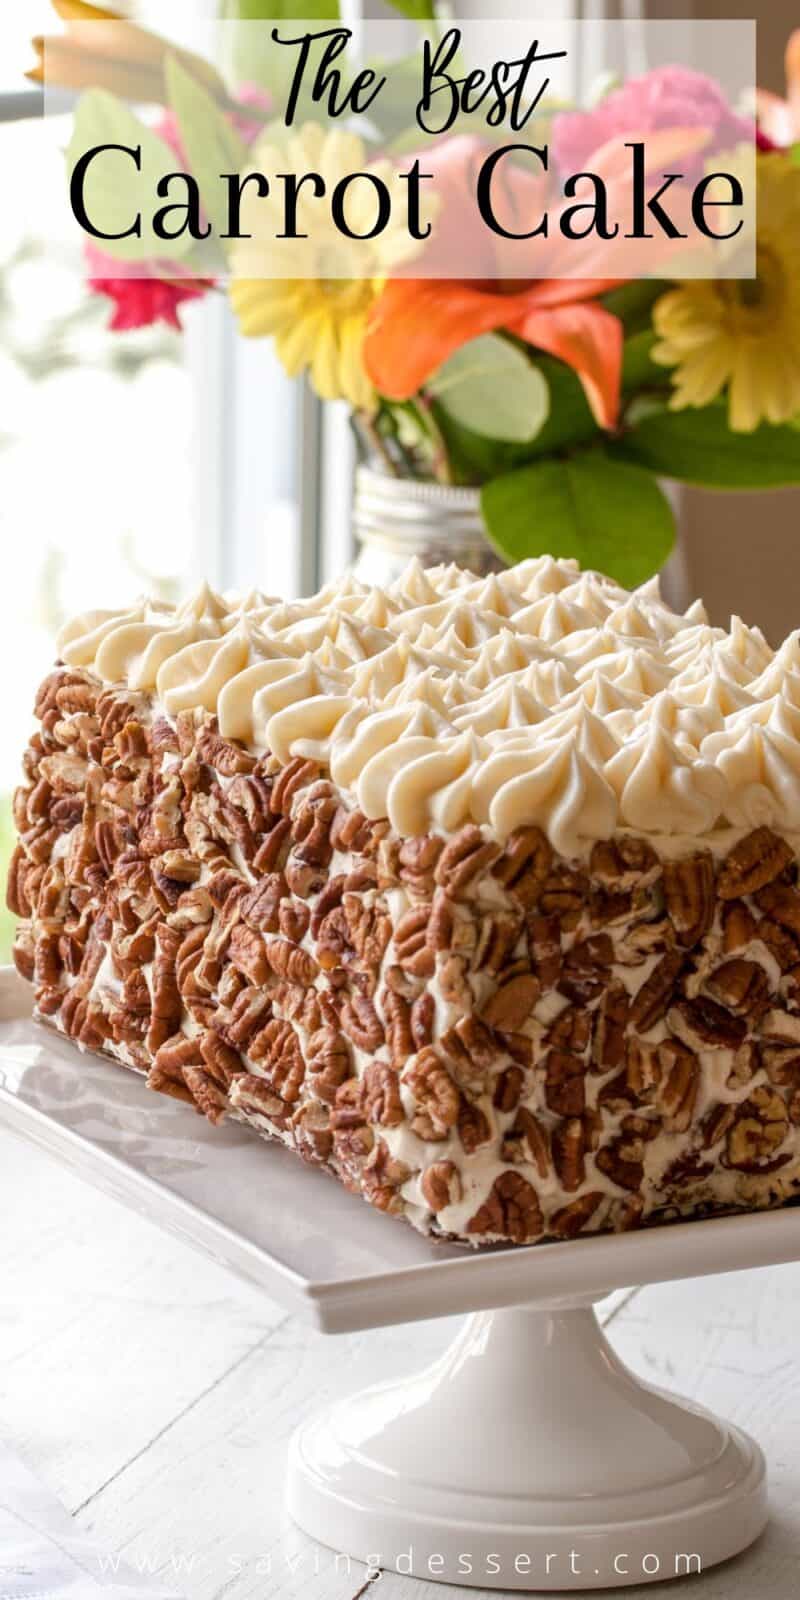 A rectangle shaped carrot cake covered in toasted pecans on a cake stand